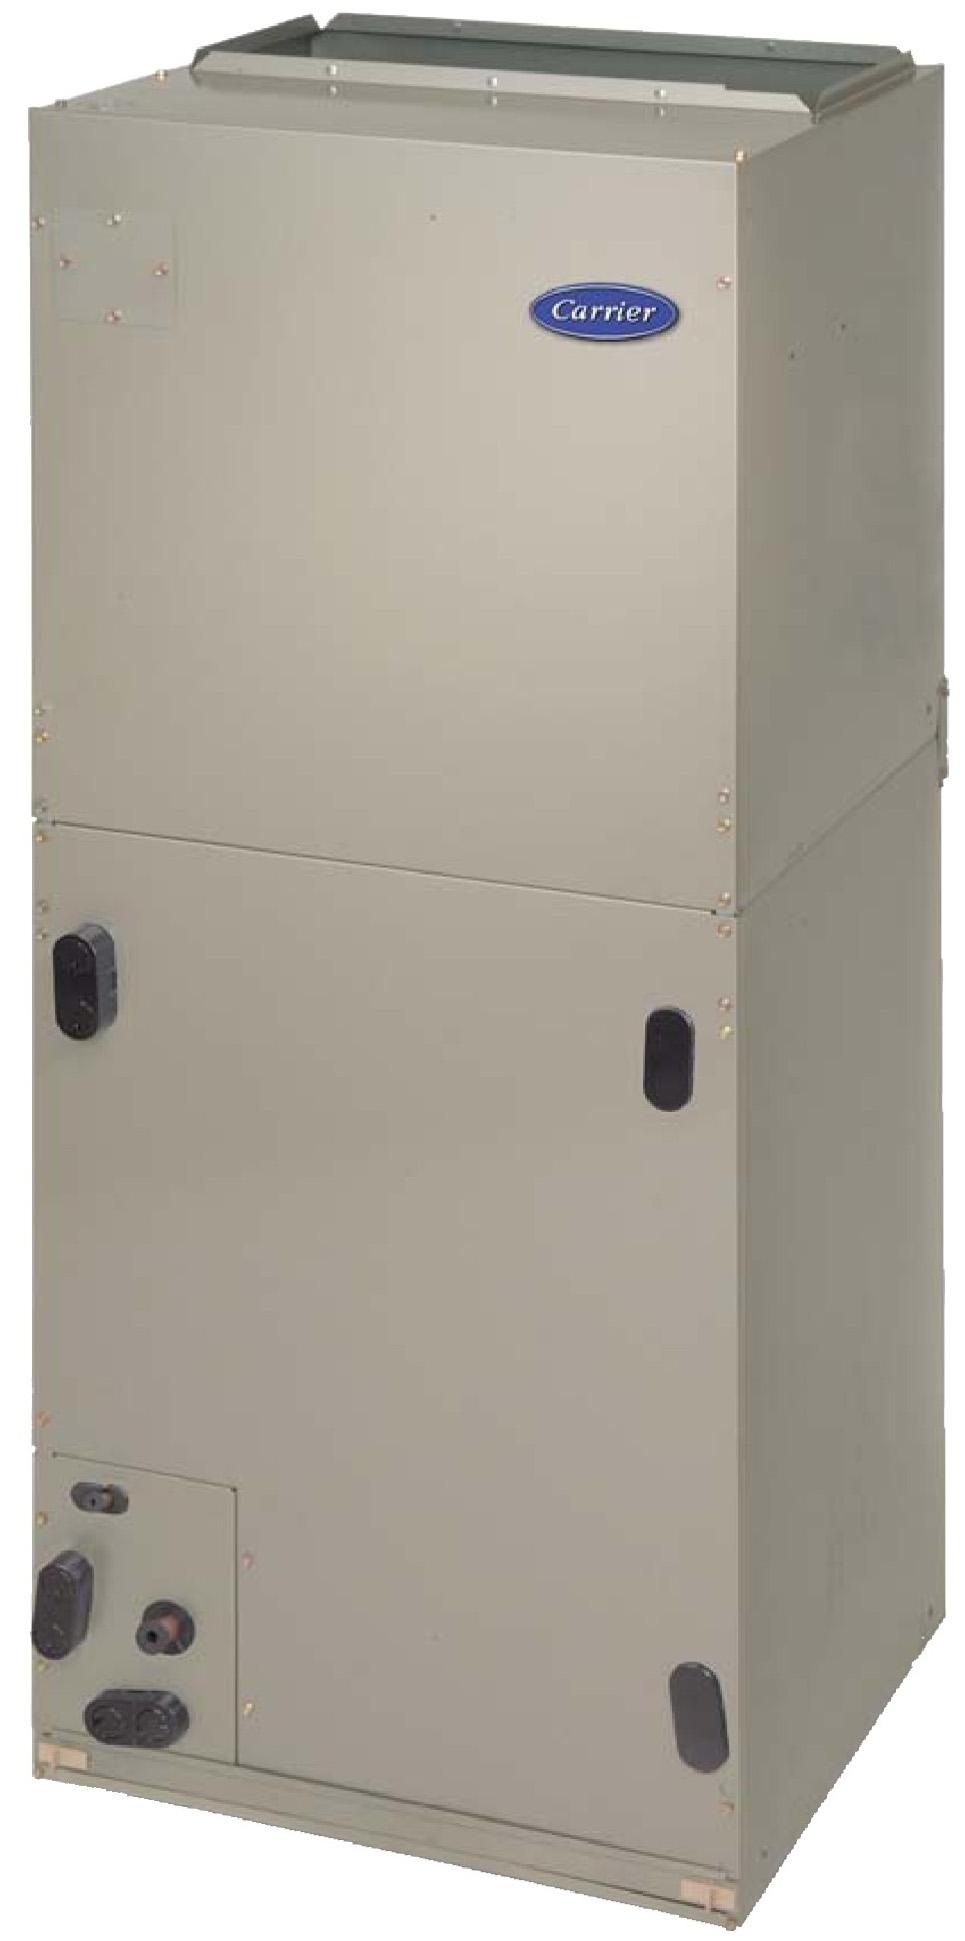 , Comfort Series Fan Coil Sizes 018 thru 060 Product Data AIR HANDLER TECHNOLOGY AT ITS FINEST The and the fan coils combine the proven technology of Carrier fan coil units with either Puron, the